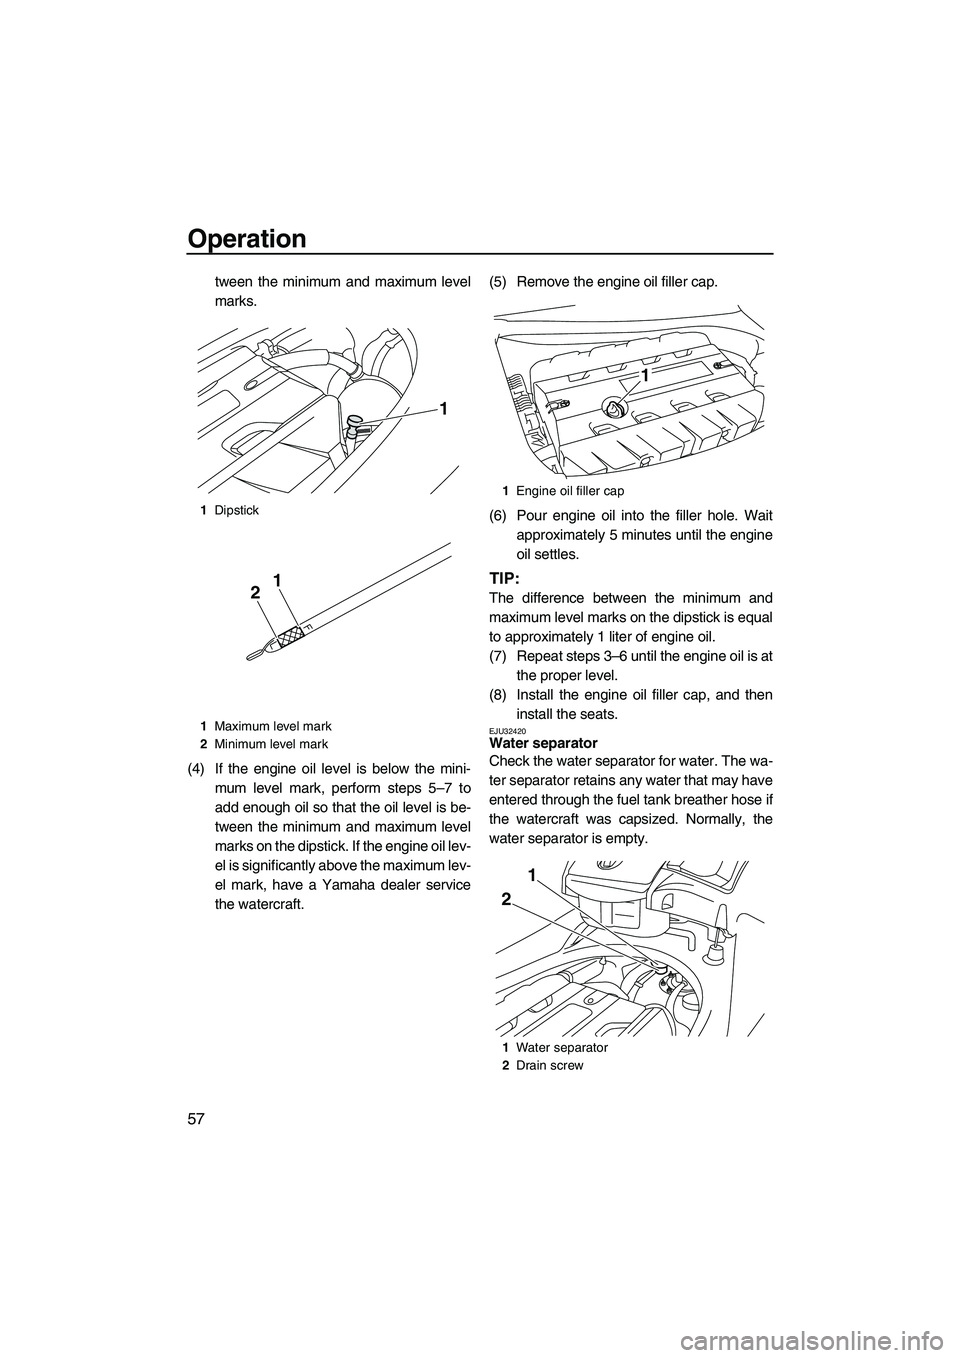 YAMAHA SVHO 2009  Owners Manual Operation
57
tween the minimum and maximum level
marks.
(4) If the engine oil level is below the mini-
mum level mark, perform steps 5–7 to
add enough oil so that the oil level is be-
tween the mini